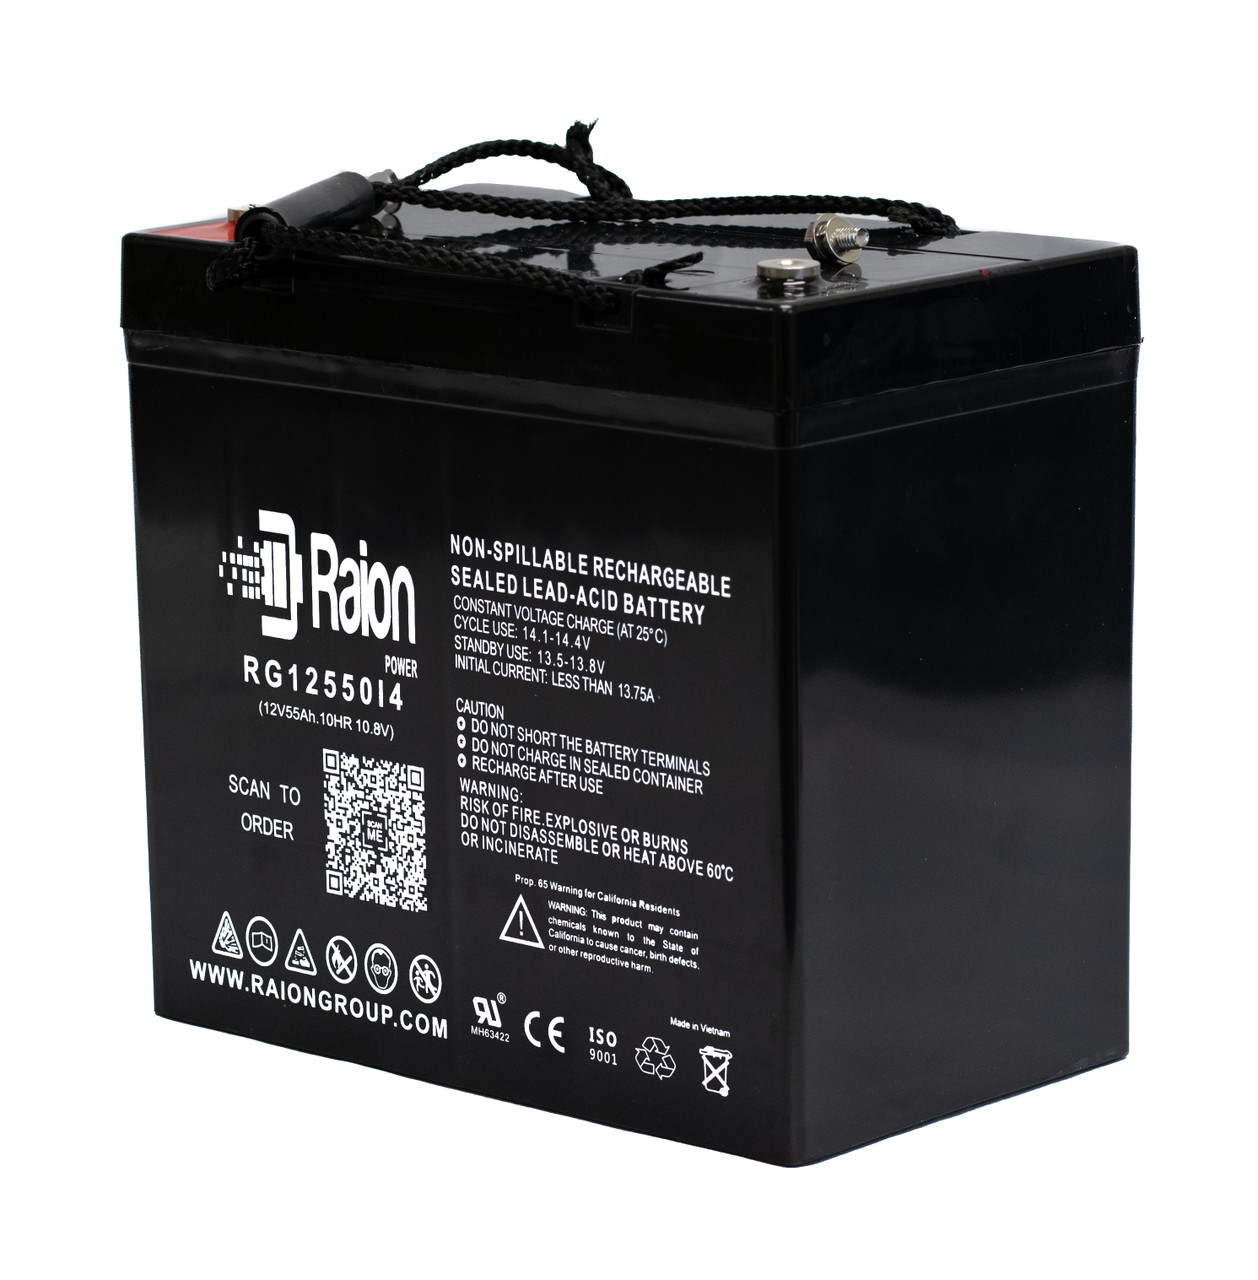 Raion Power Replacement 12V 55Ah Emergency Light Battery for Simplex 112136 - 1 Pack